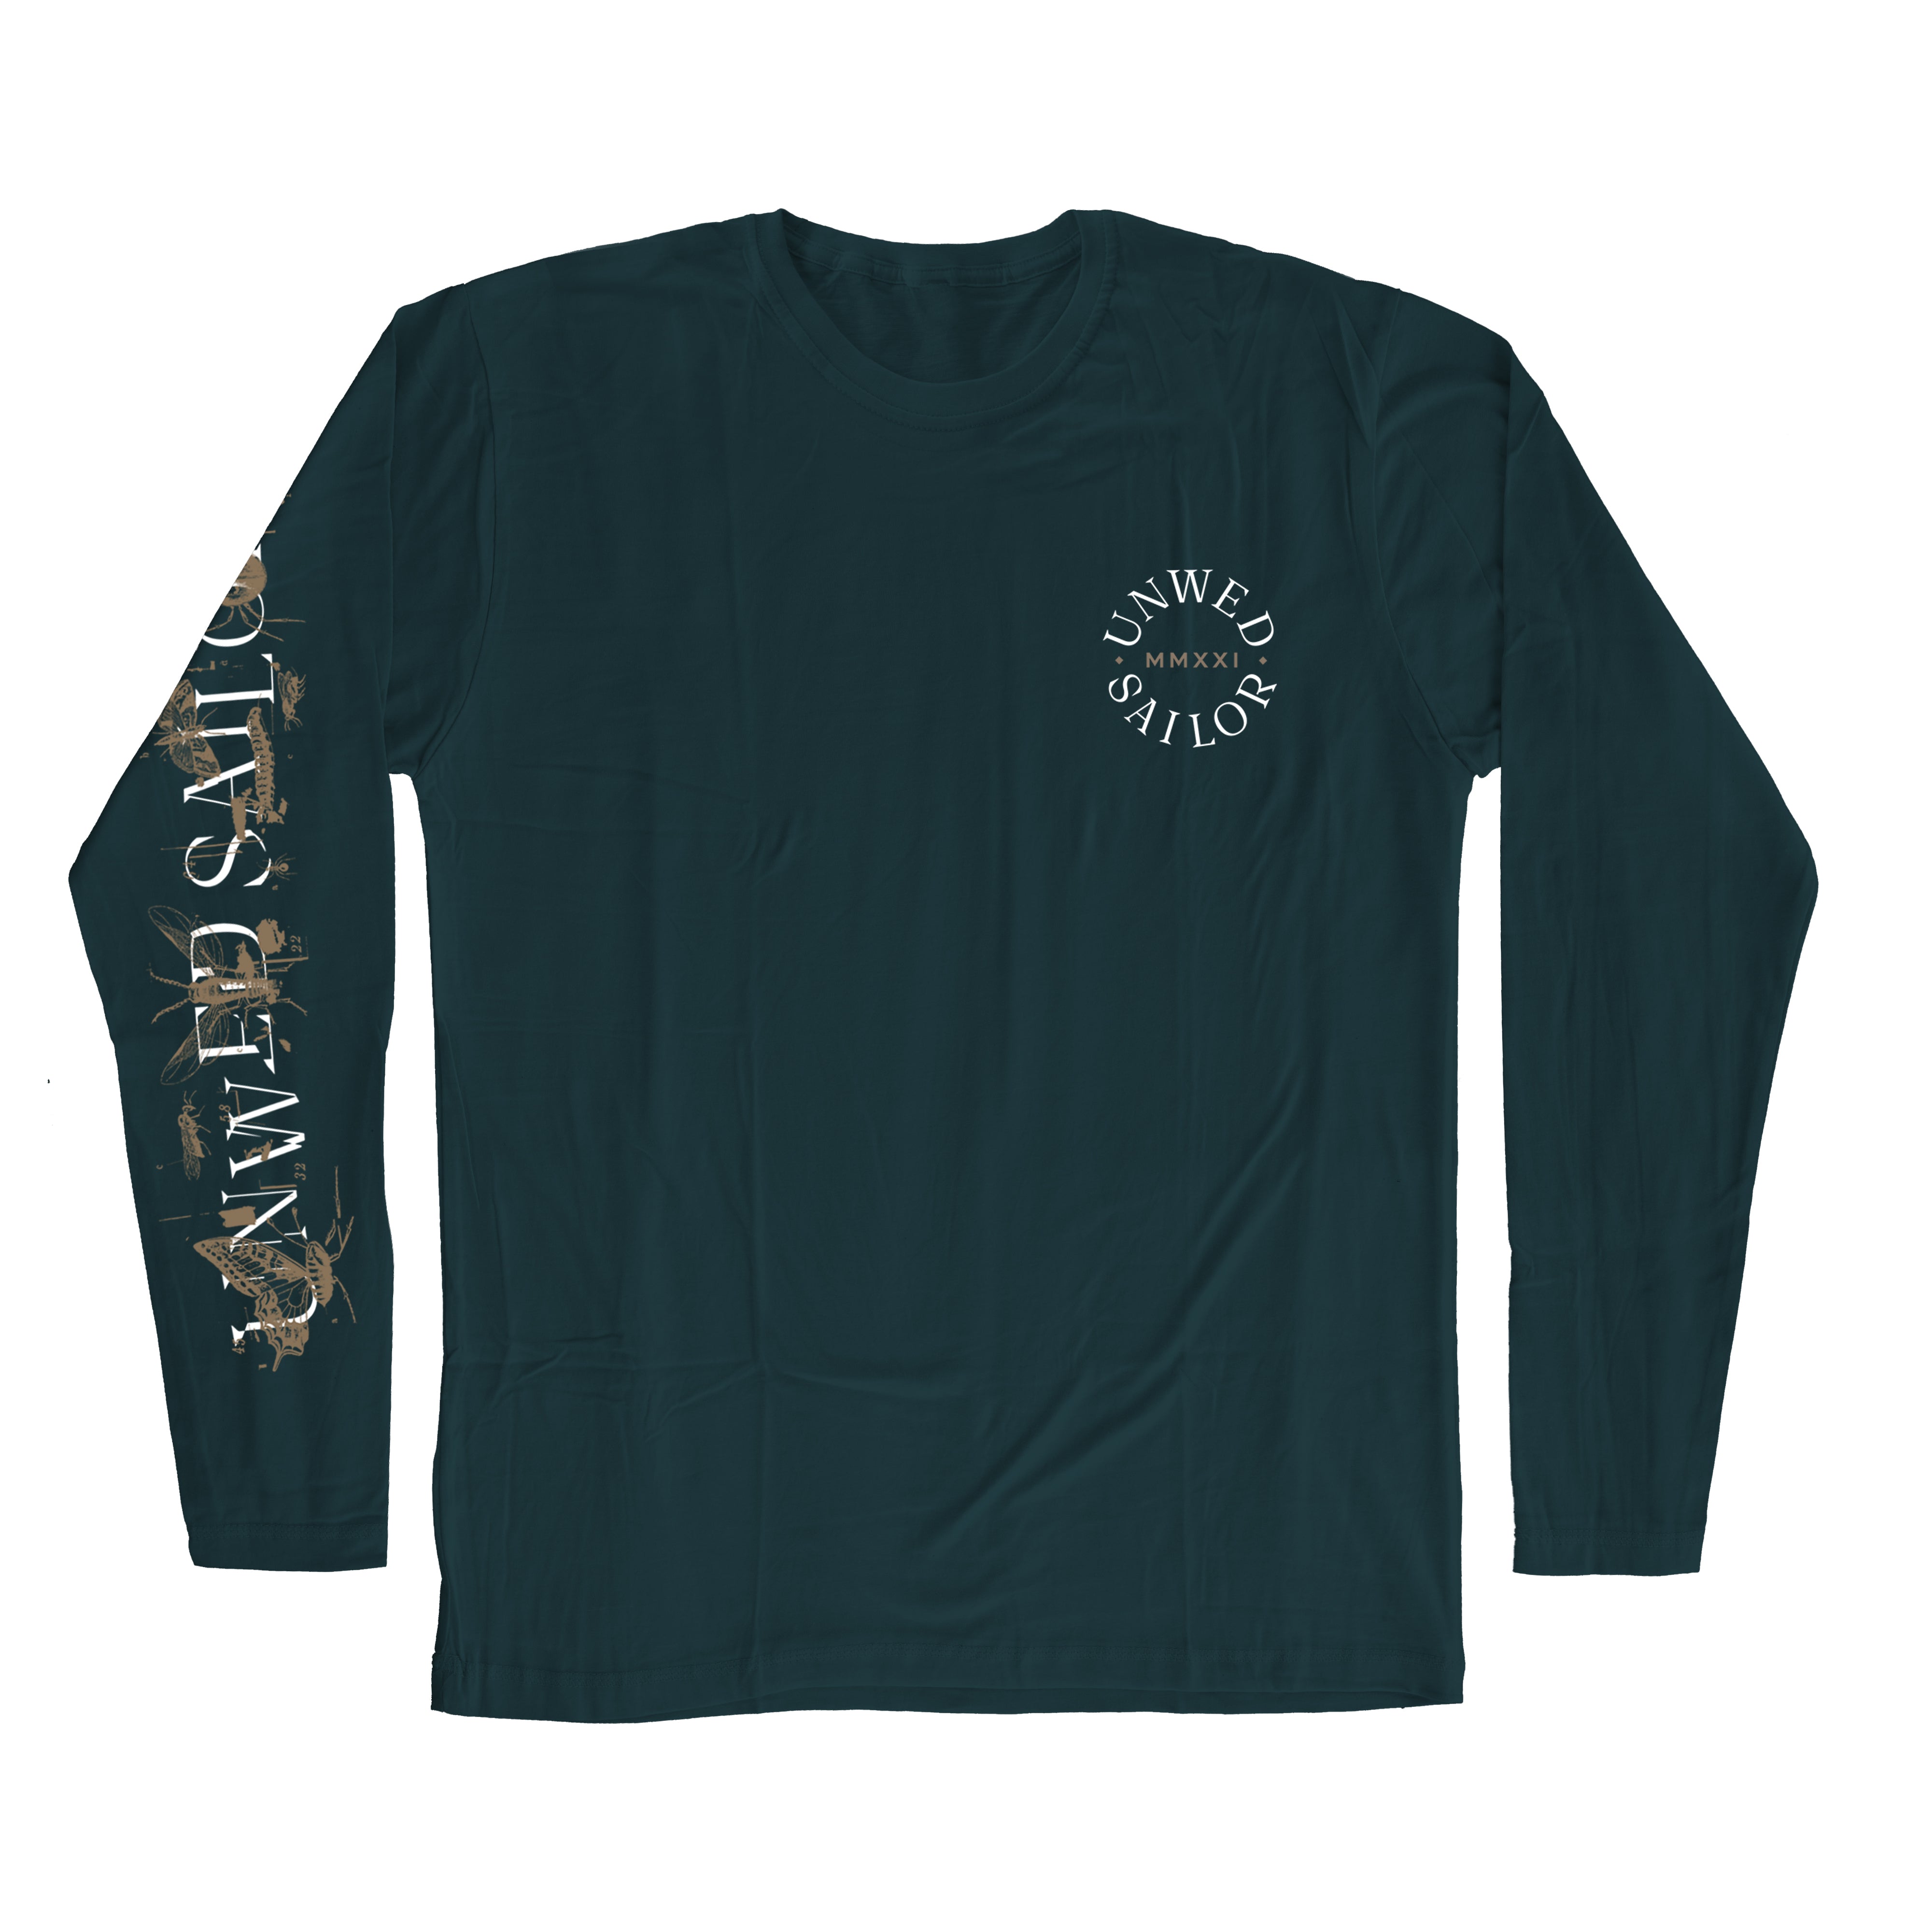 Unwed Sailor - MMXXI Long Sleeve T-Shirt – Spartan Records